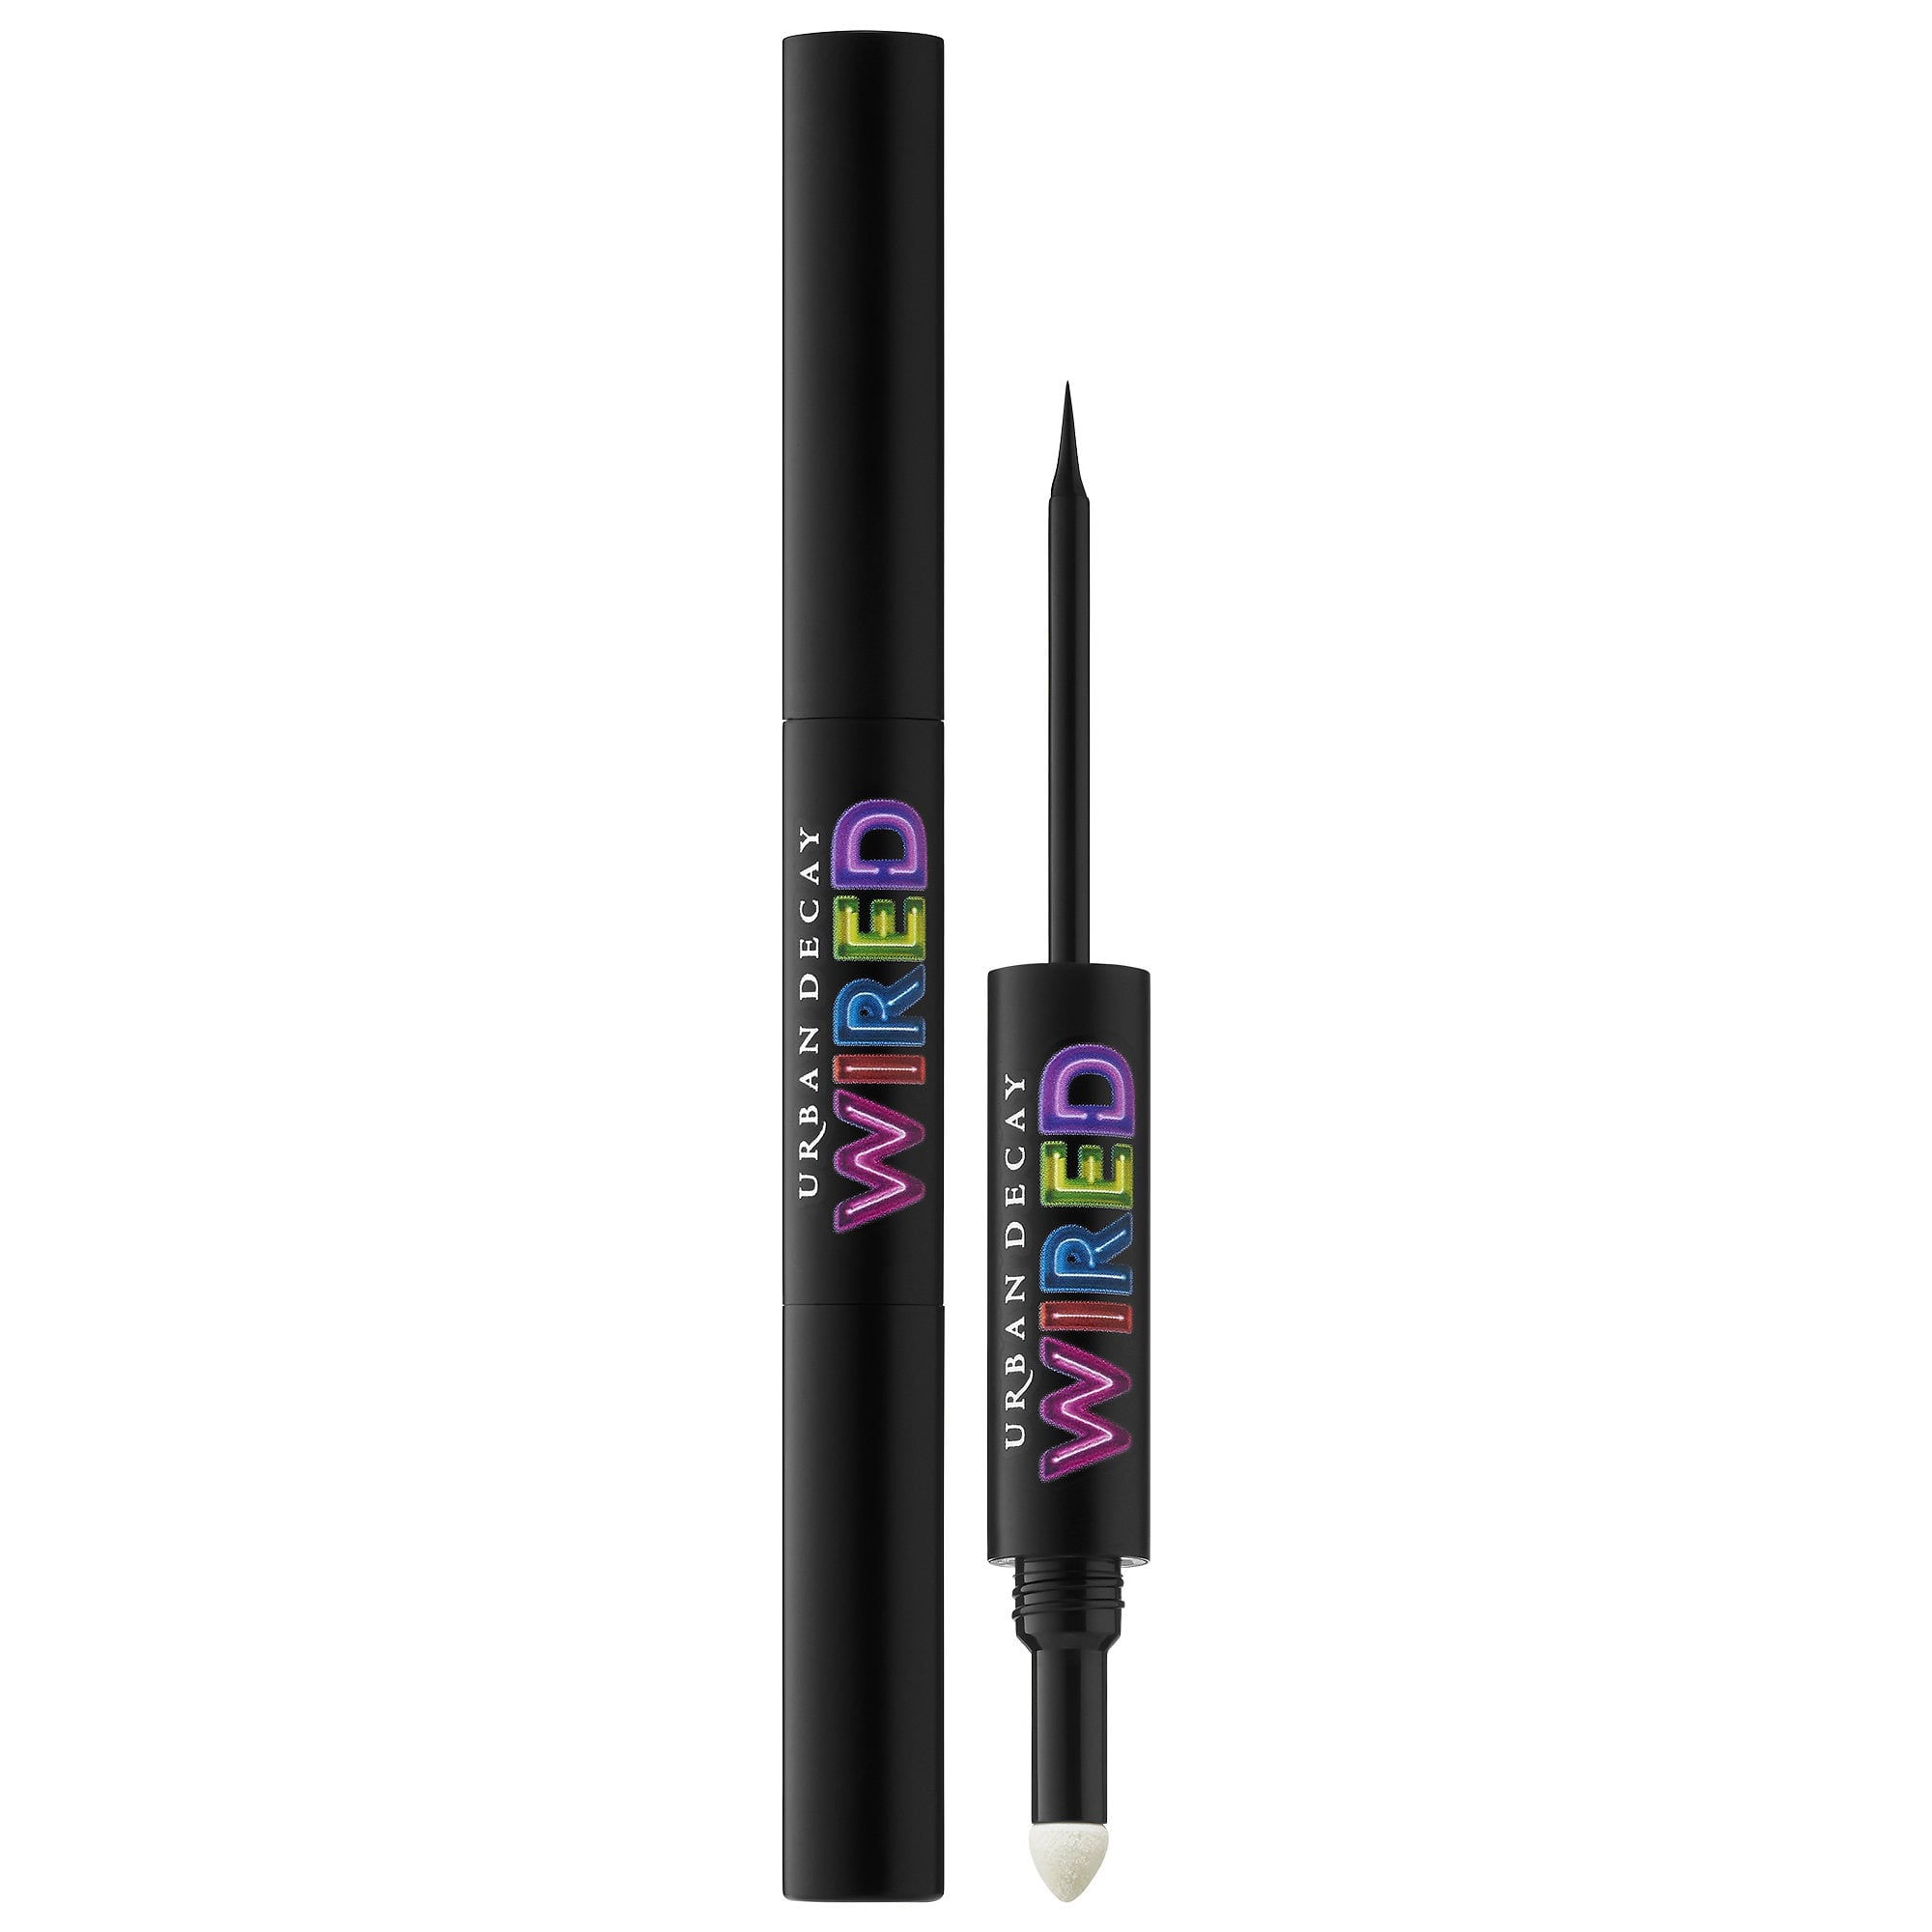 Urban Decay Double-Ended Eyeliner and Top Coat - Collection | Weekend Is Coming Early Sephora's Memorial Sale, With Deals Up to 50% Off | POPSUGAR Beauty Photo 20